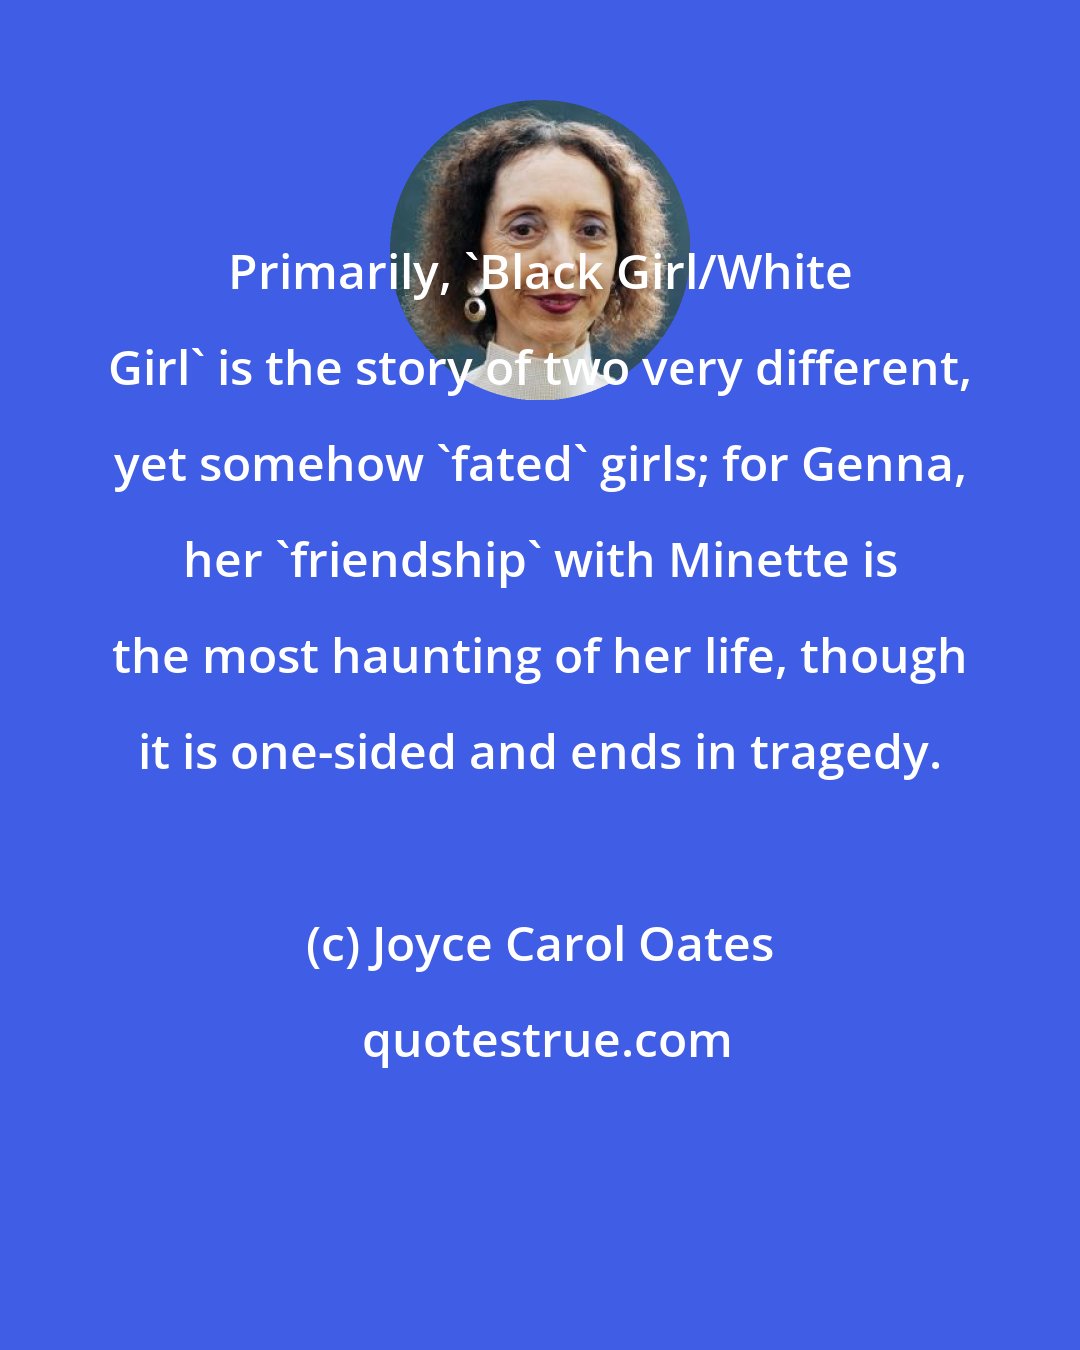 Joyce Carol Oates: Primarily, 'Black Girl/White Girl' is the story of two very different, yet somehow 'fated' girls; for Genna, her 'friendship' with Minette is the most haunting of her life, though it is one-sided and ends in tragedy.